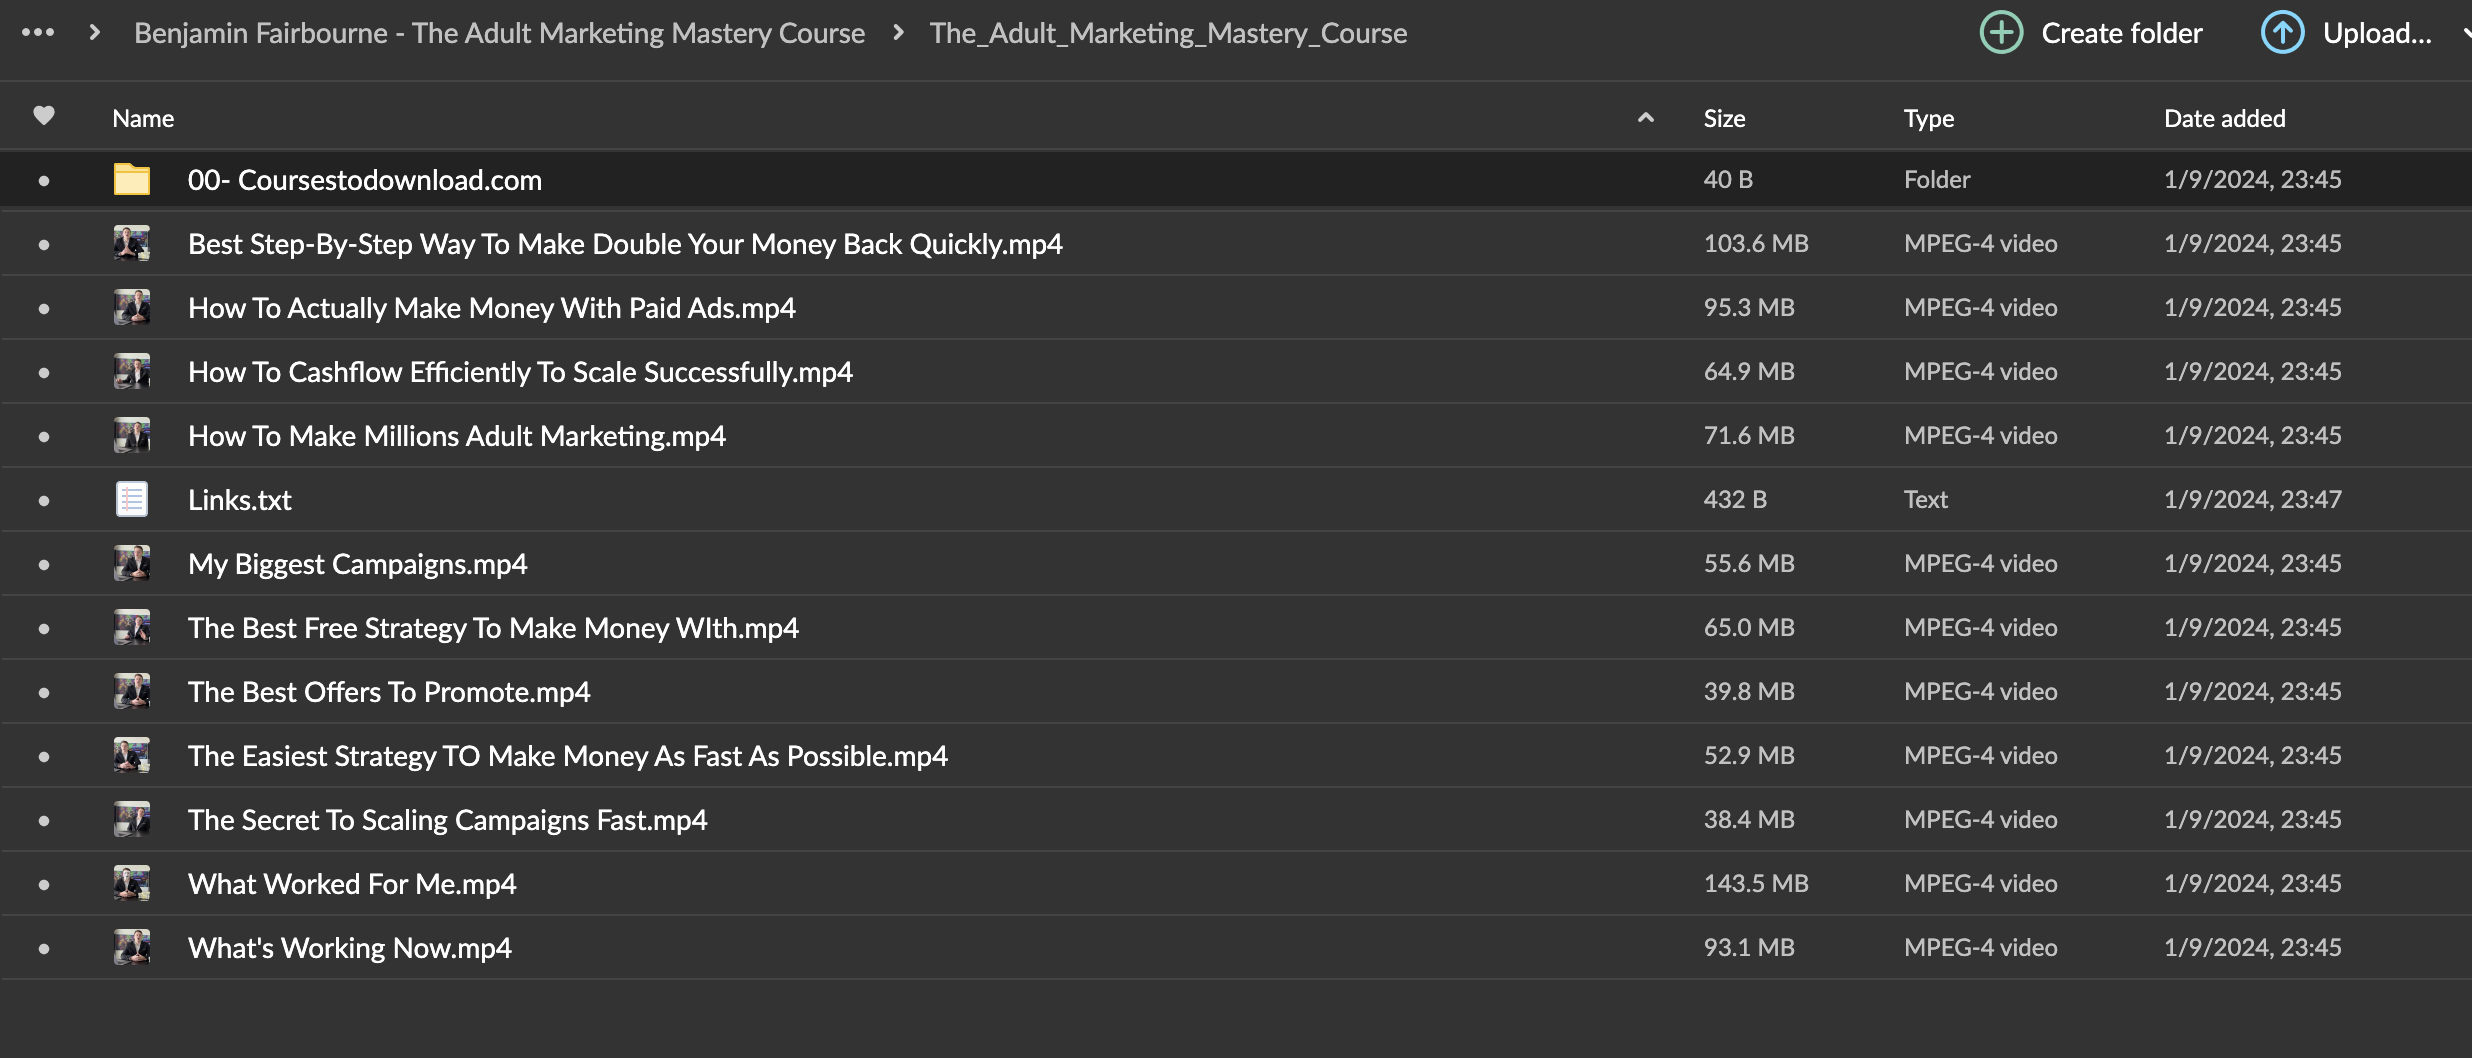 Benjamin Fairbourne - The Adult Marketing Mastery Course Download